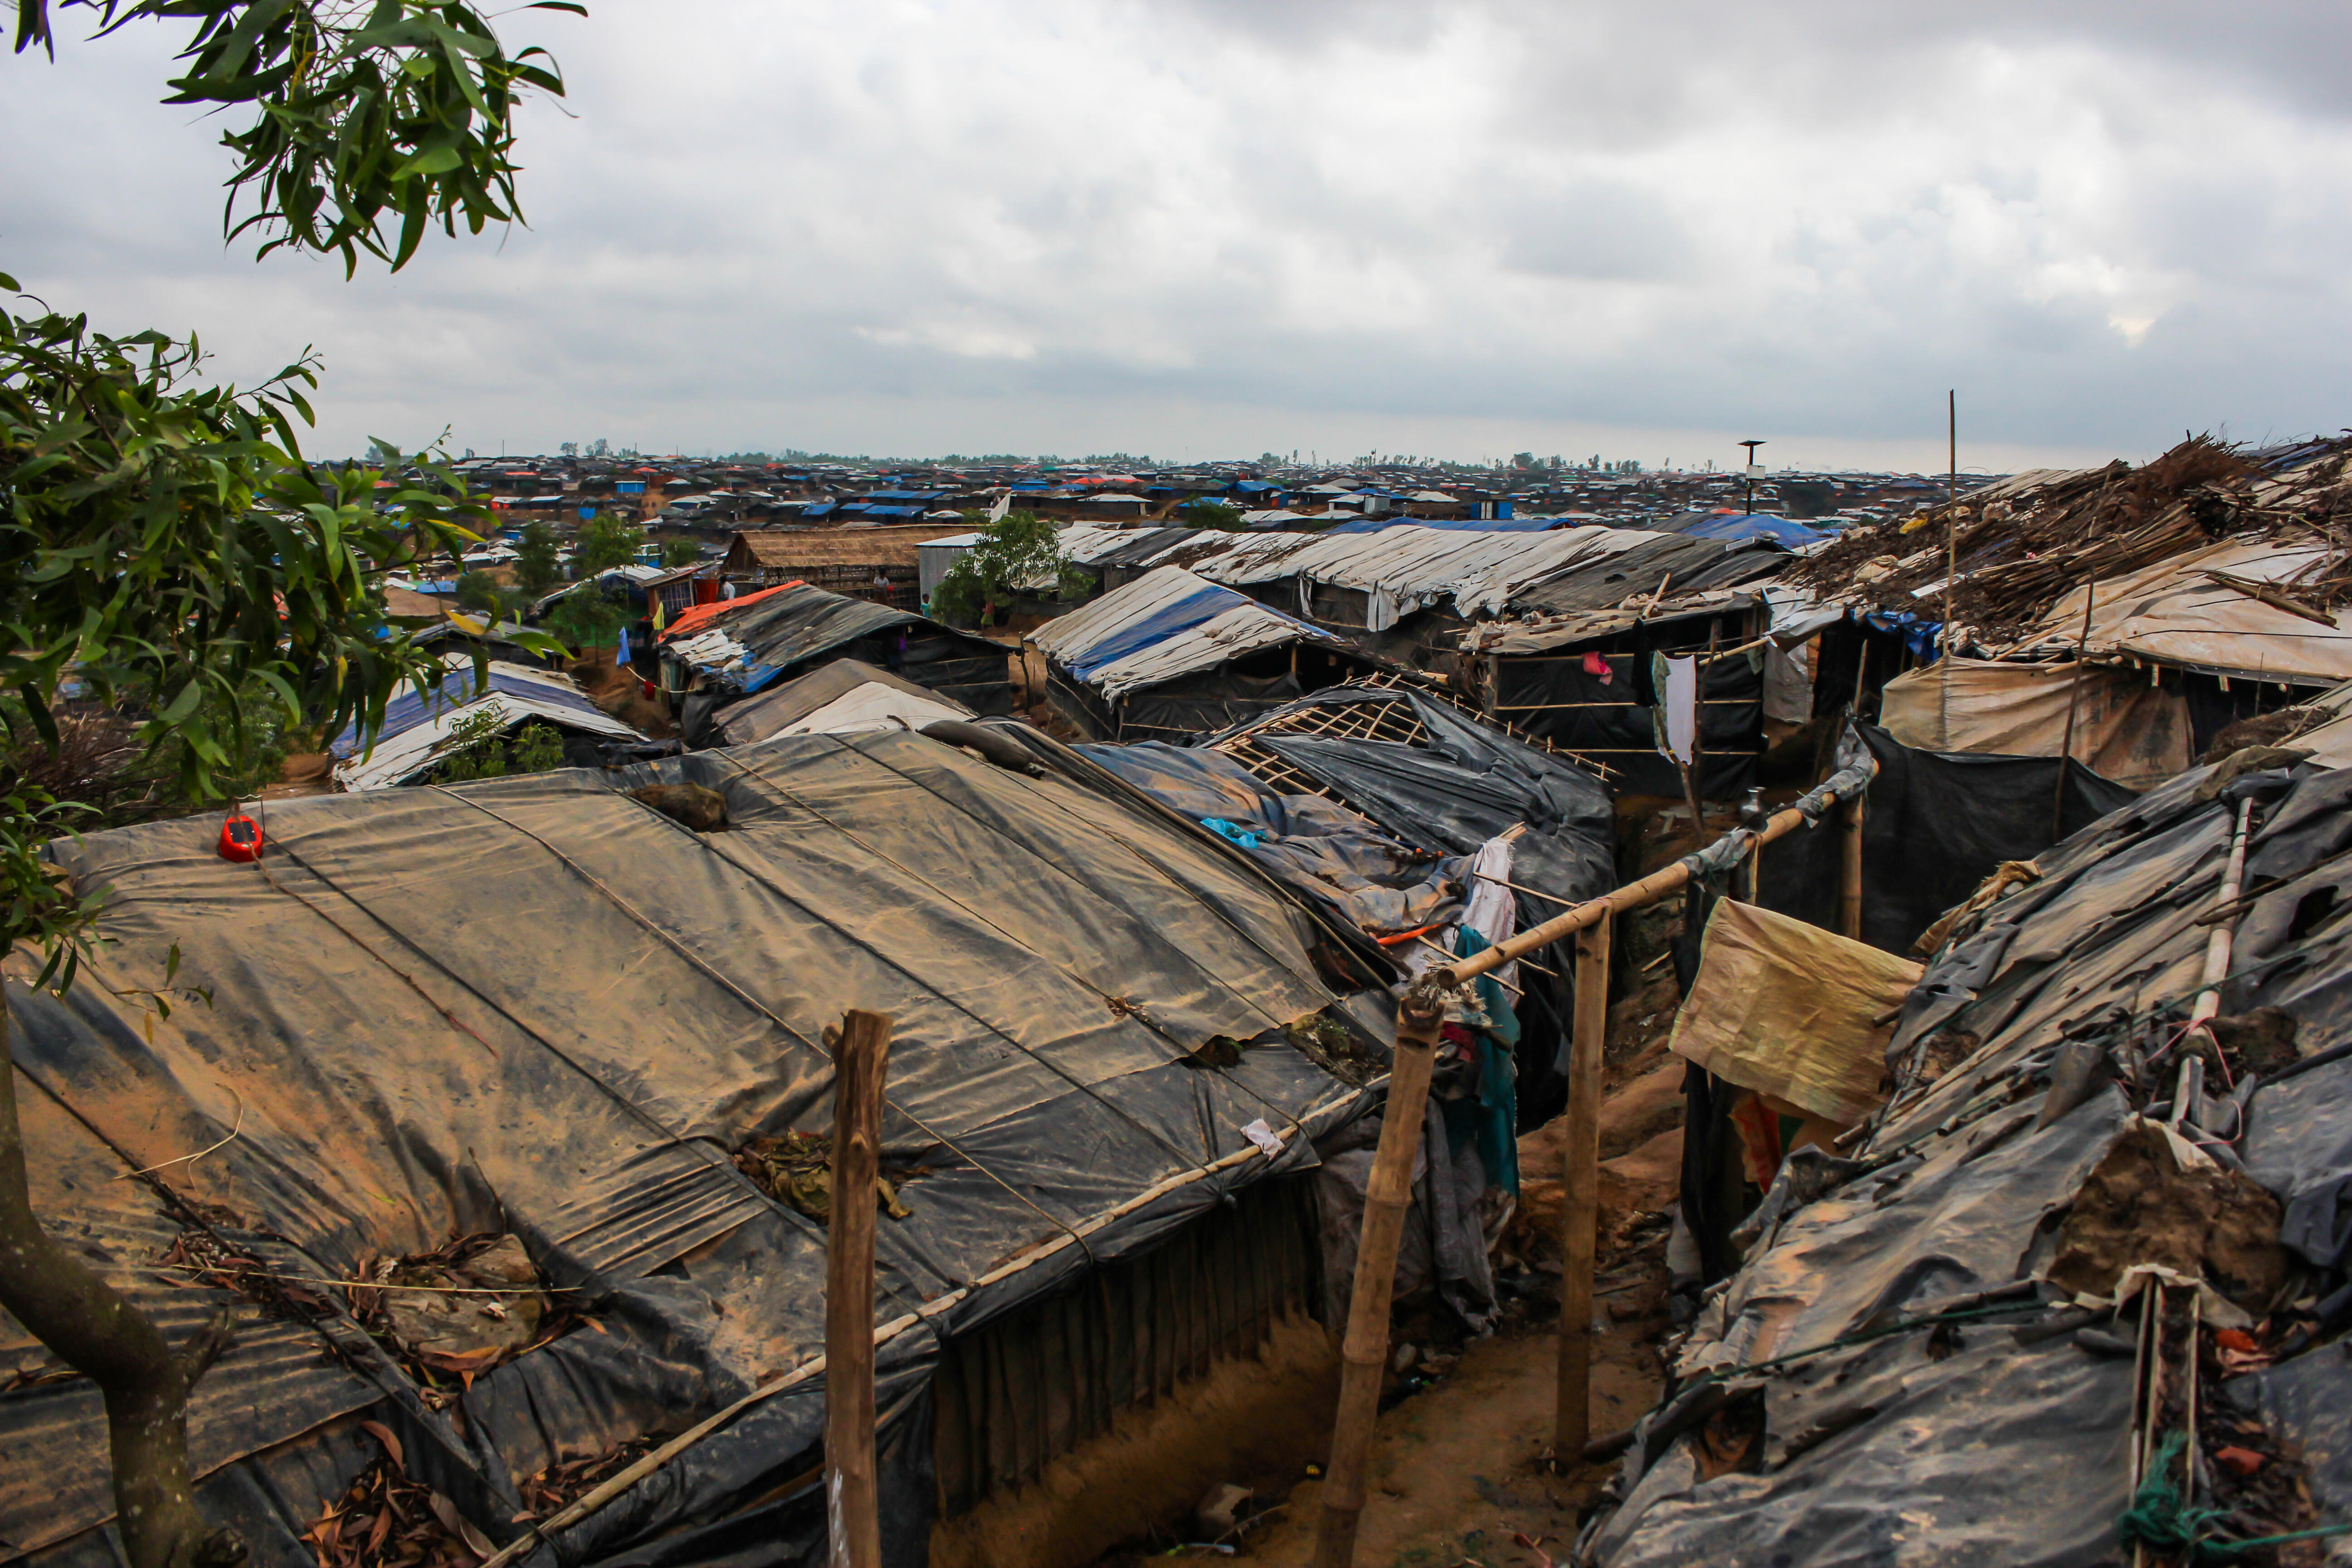 Makeshift refugee shelters made of bamboo, tarps and other found materials.